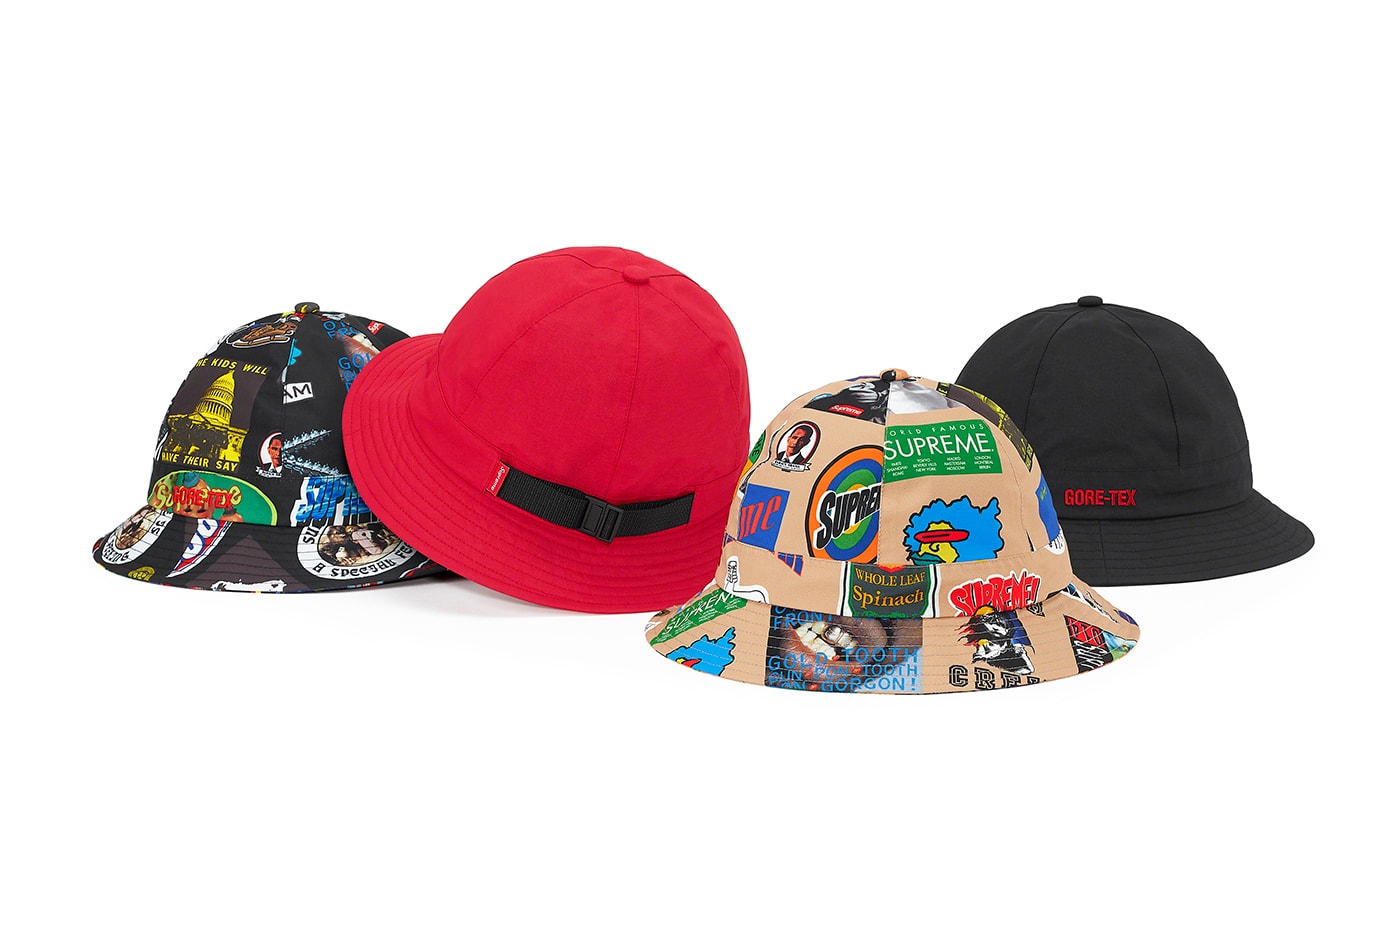 Supreme Spring/Summer 2021 Hats Caps camp 5/6 panels crusher beanies Buy price date info